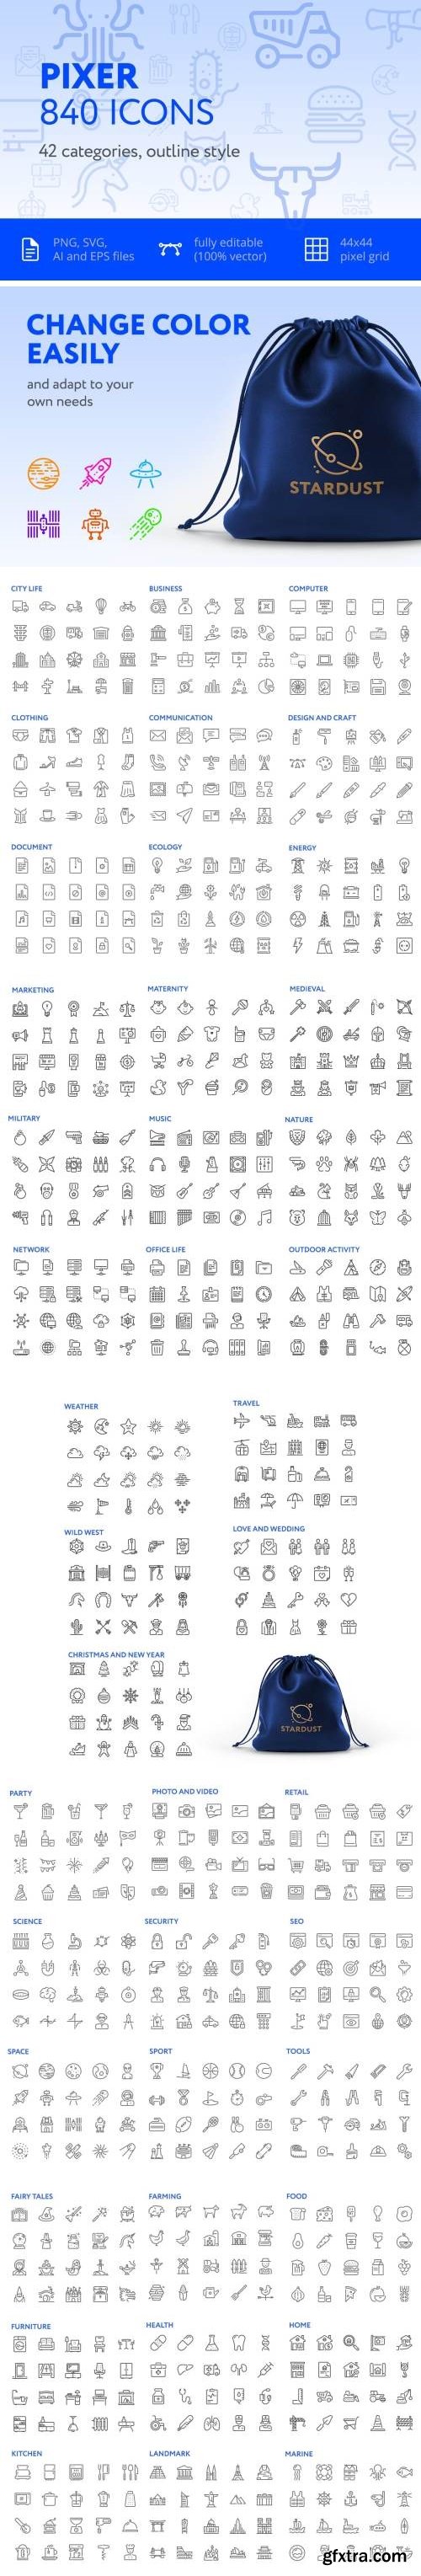 Pixer — 840 outline icons